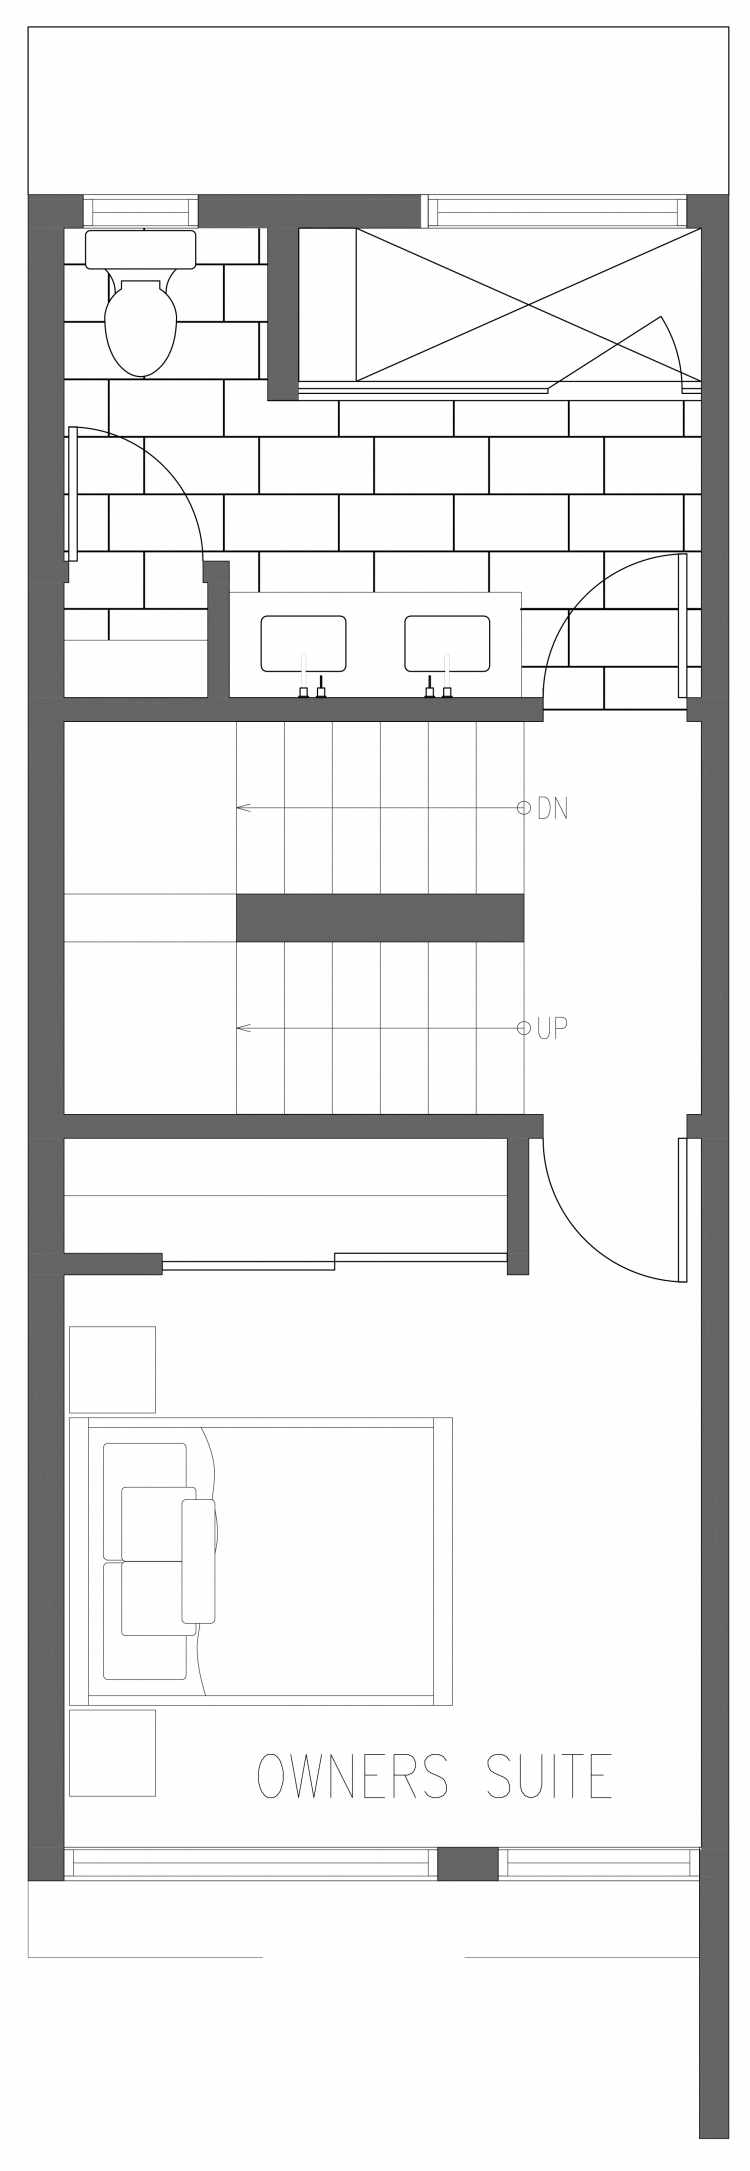 Third Floor Plan of 2357 Beacon Ave S, One of the Brea Townhomes in North Beacon Hill